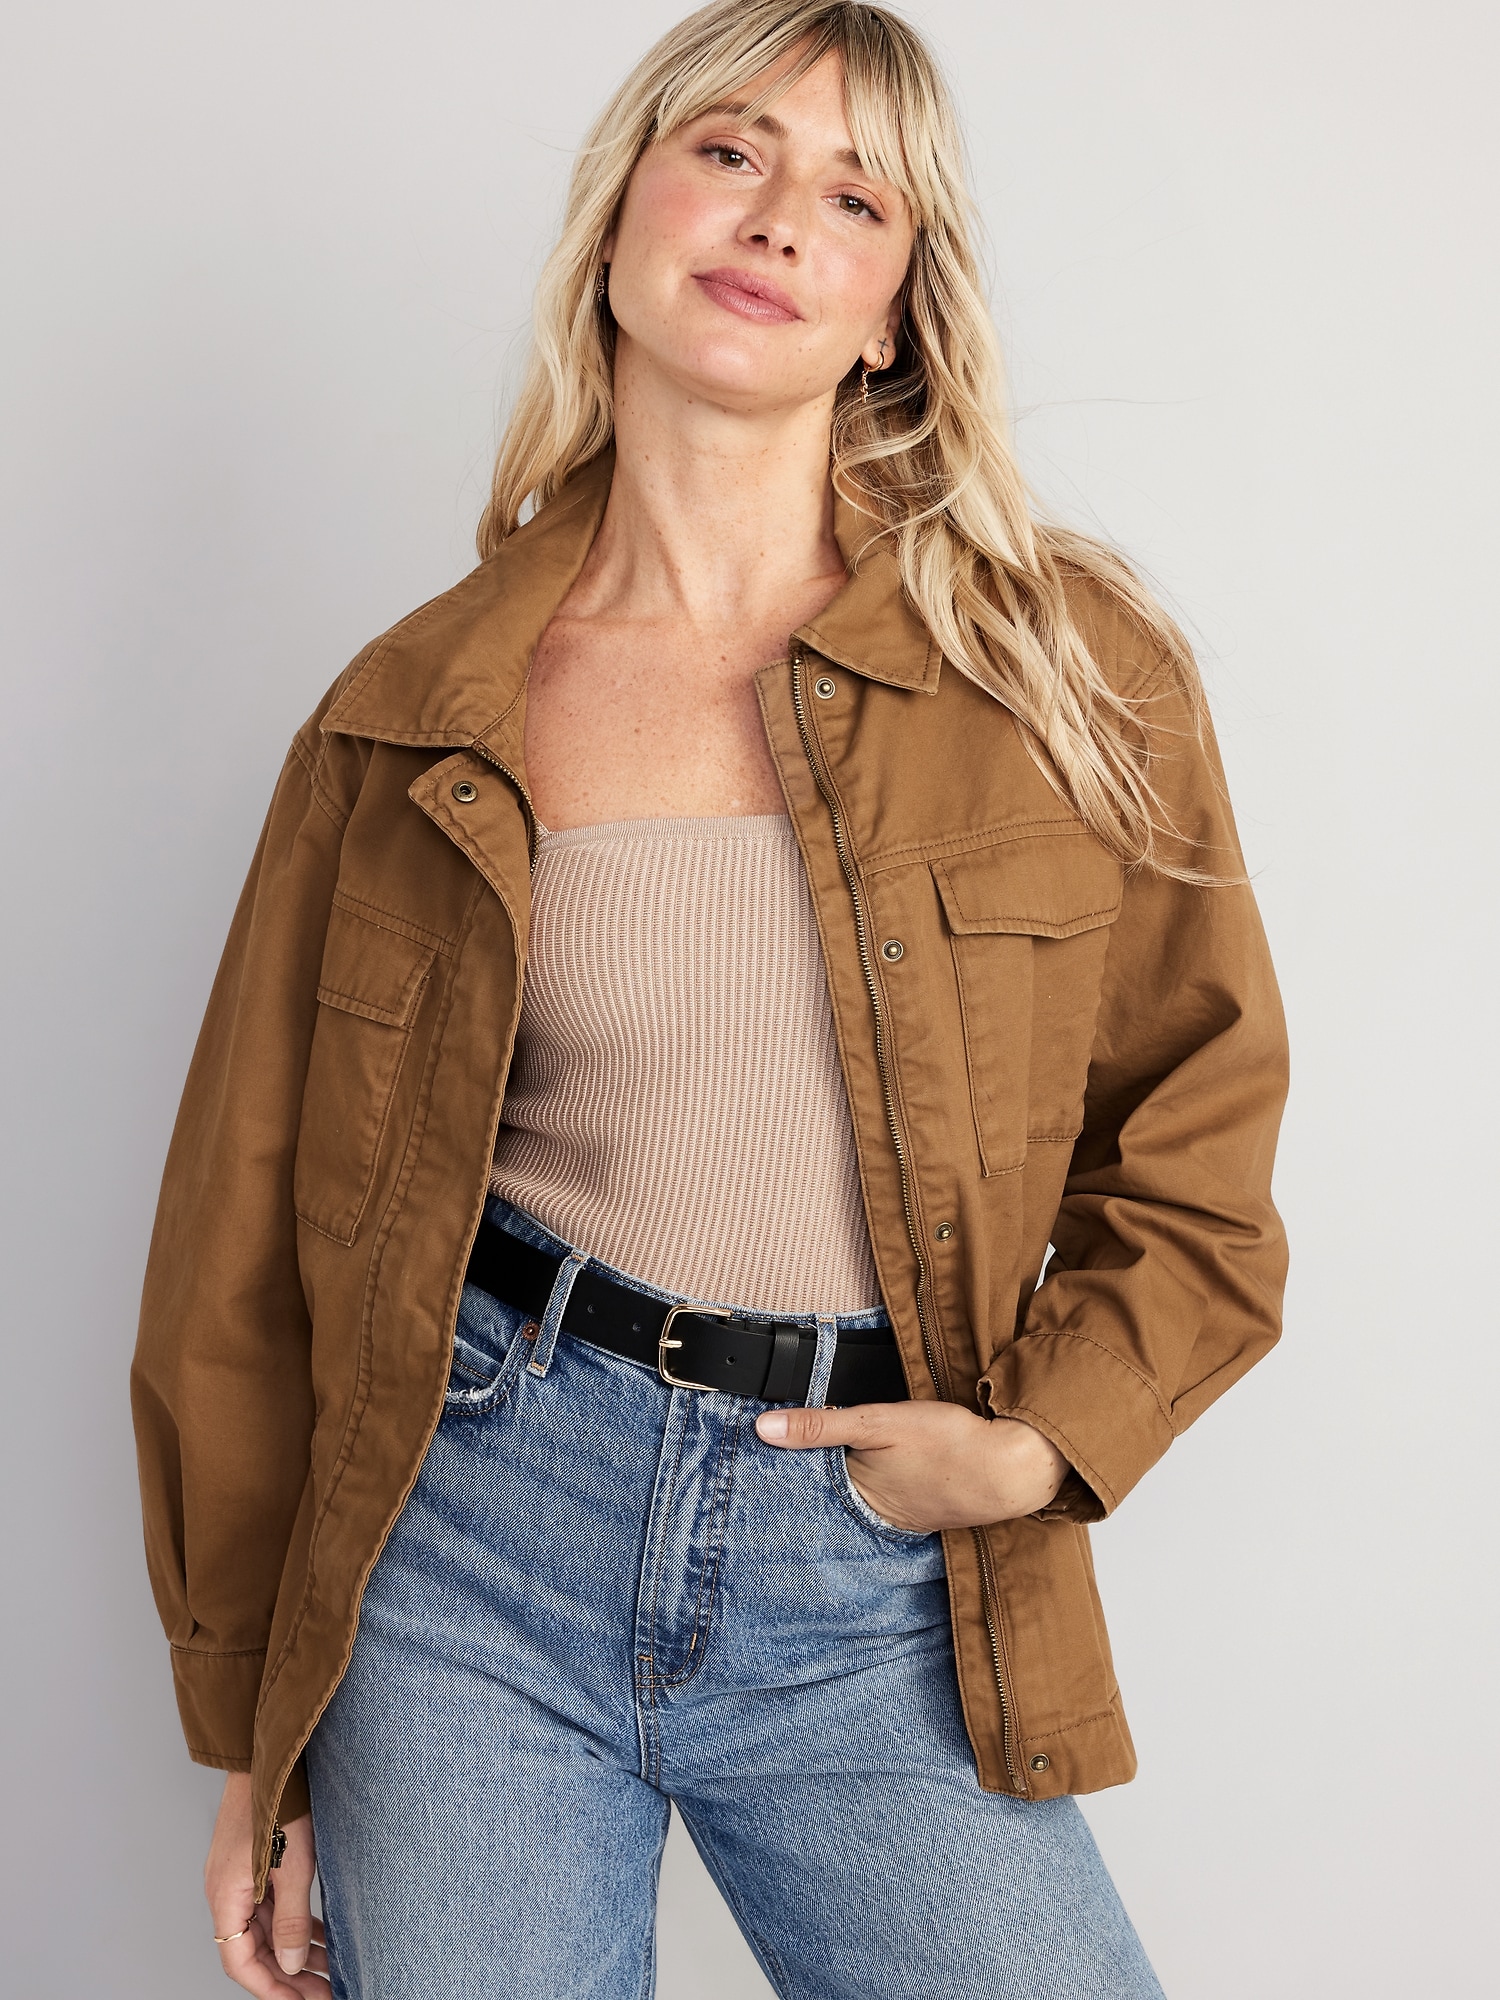 Cinched-Waist Utility Jacket | Old Navy